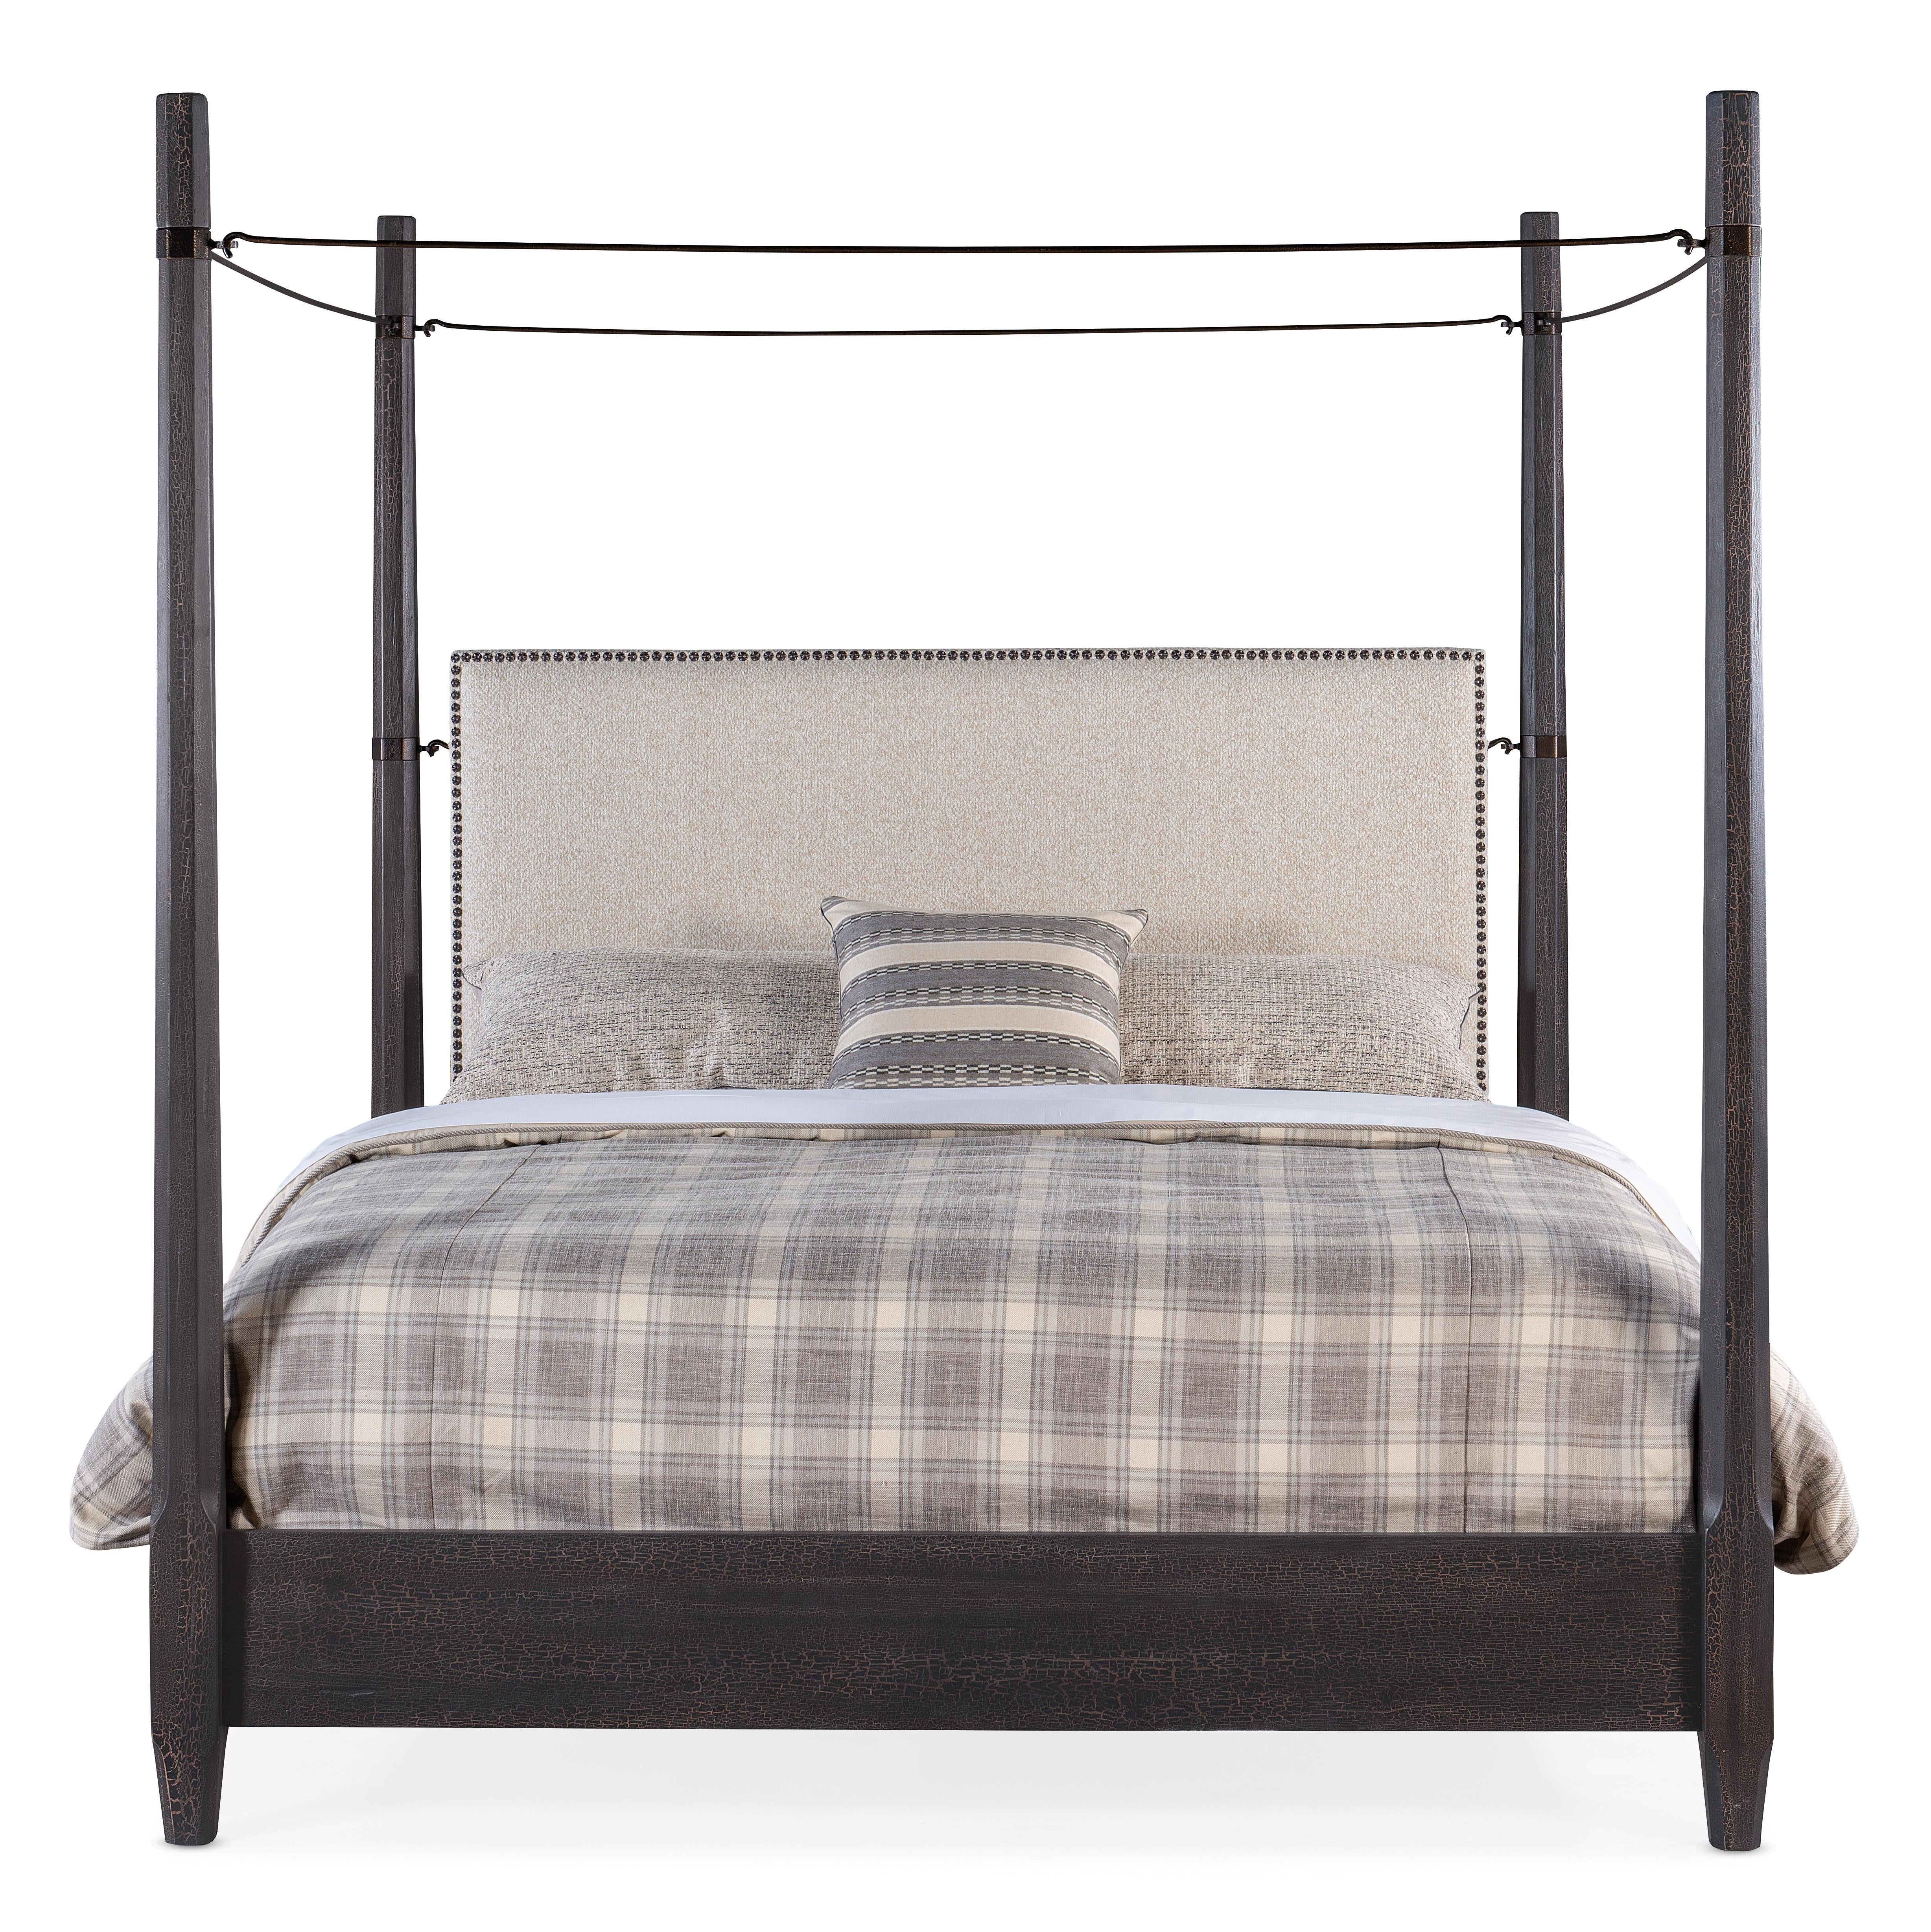 Big Sky Cal King Poster Bed w/canopy